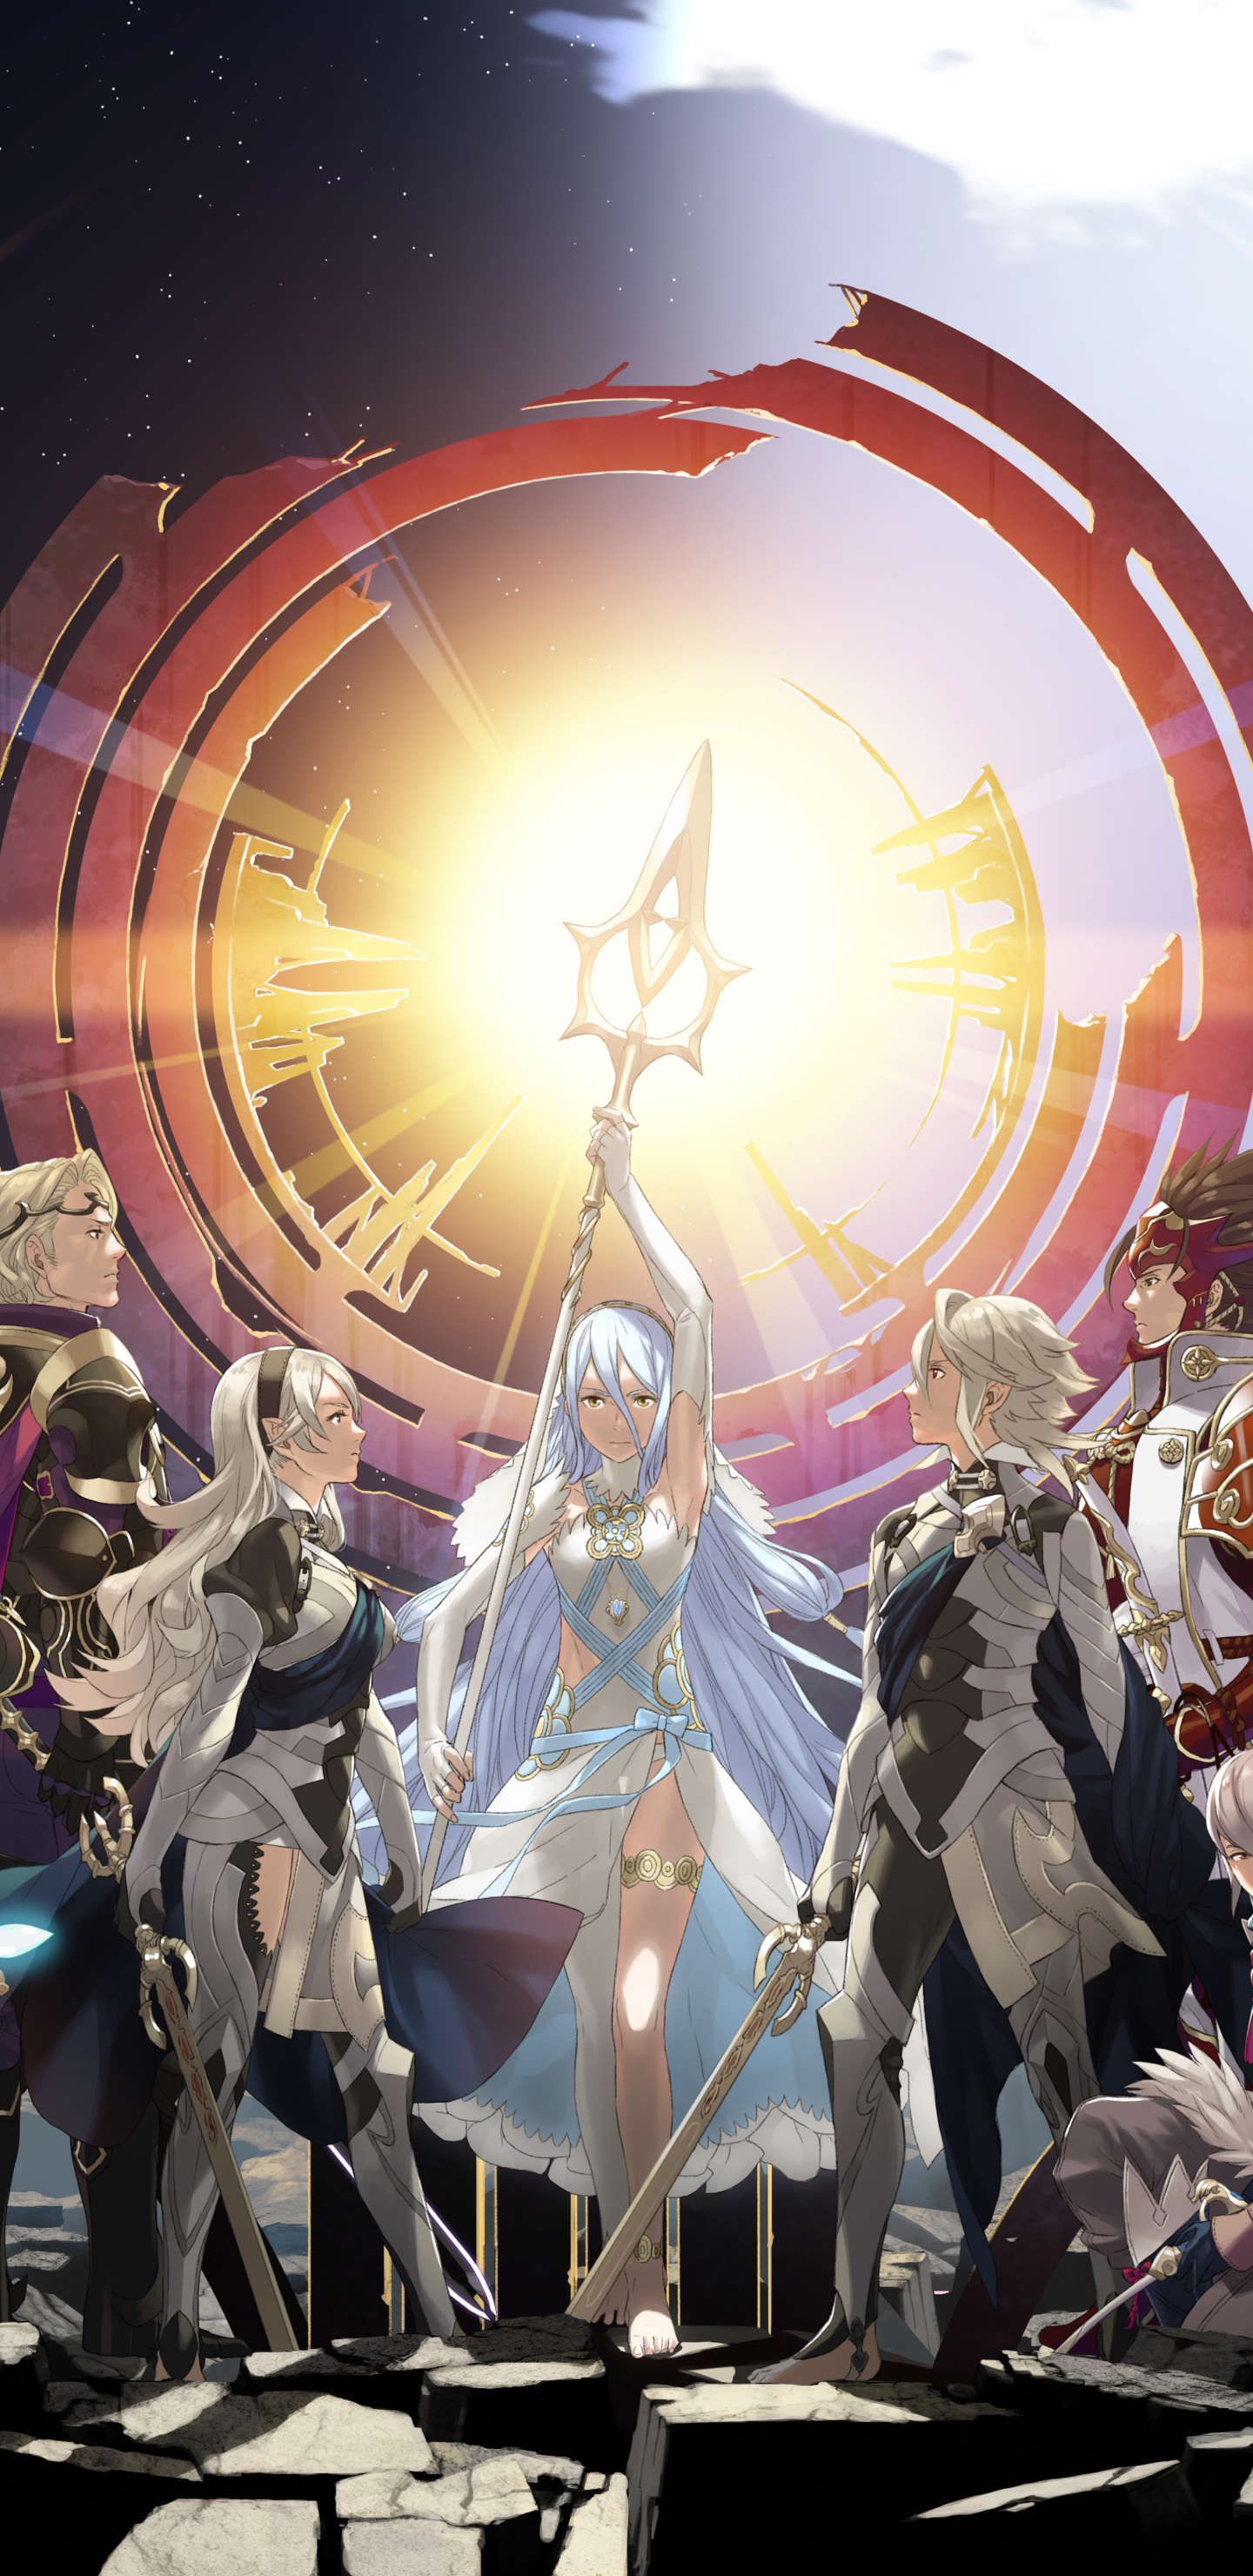 Fire Emblem Gaming, Fates iPhone Wallpapers, Popular backgrounds, 1440x2960 HD Handy